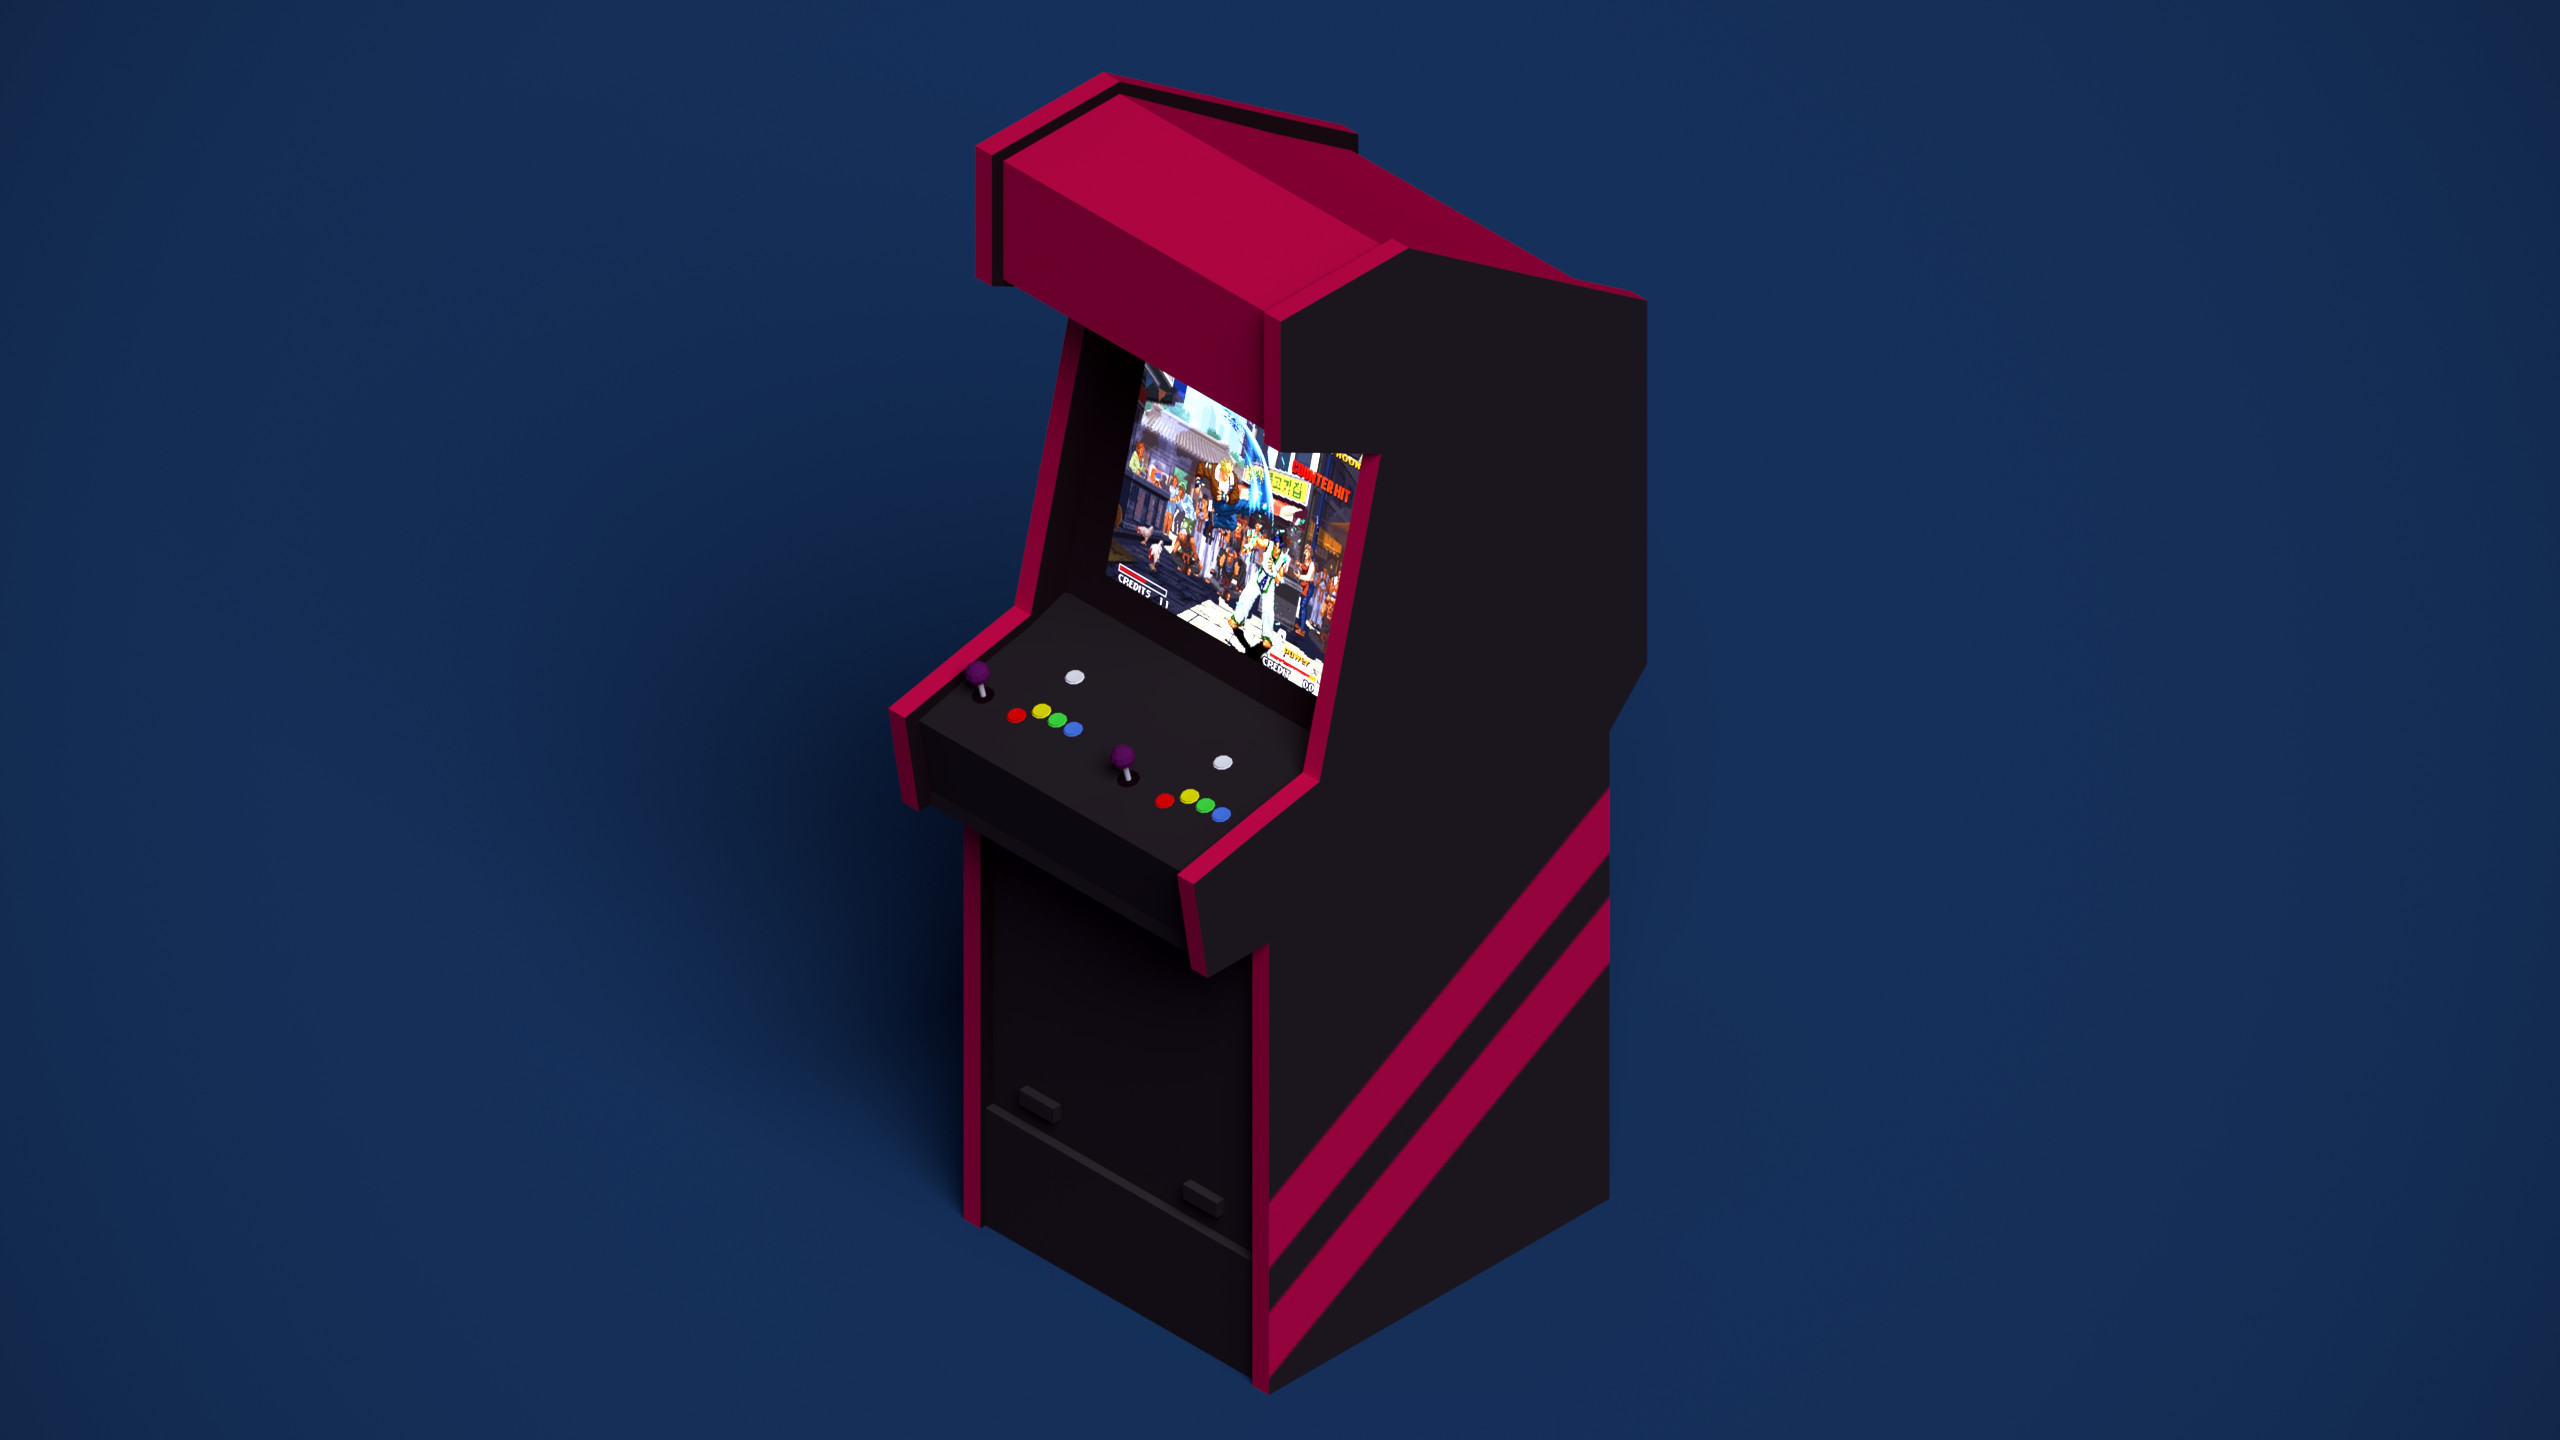 2560x1440 Related for Arcade Wallpapers: ( more ... )